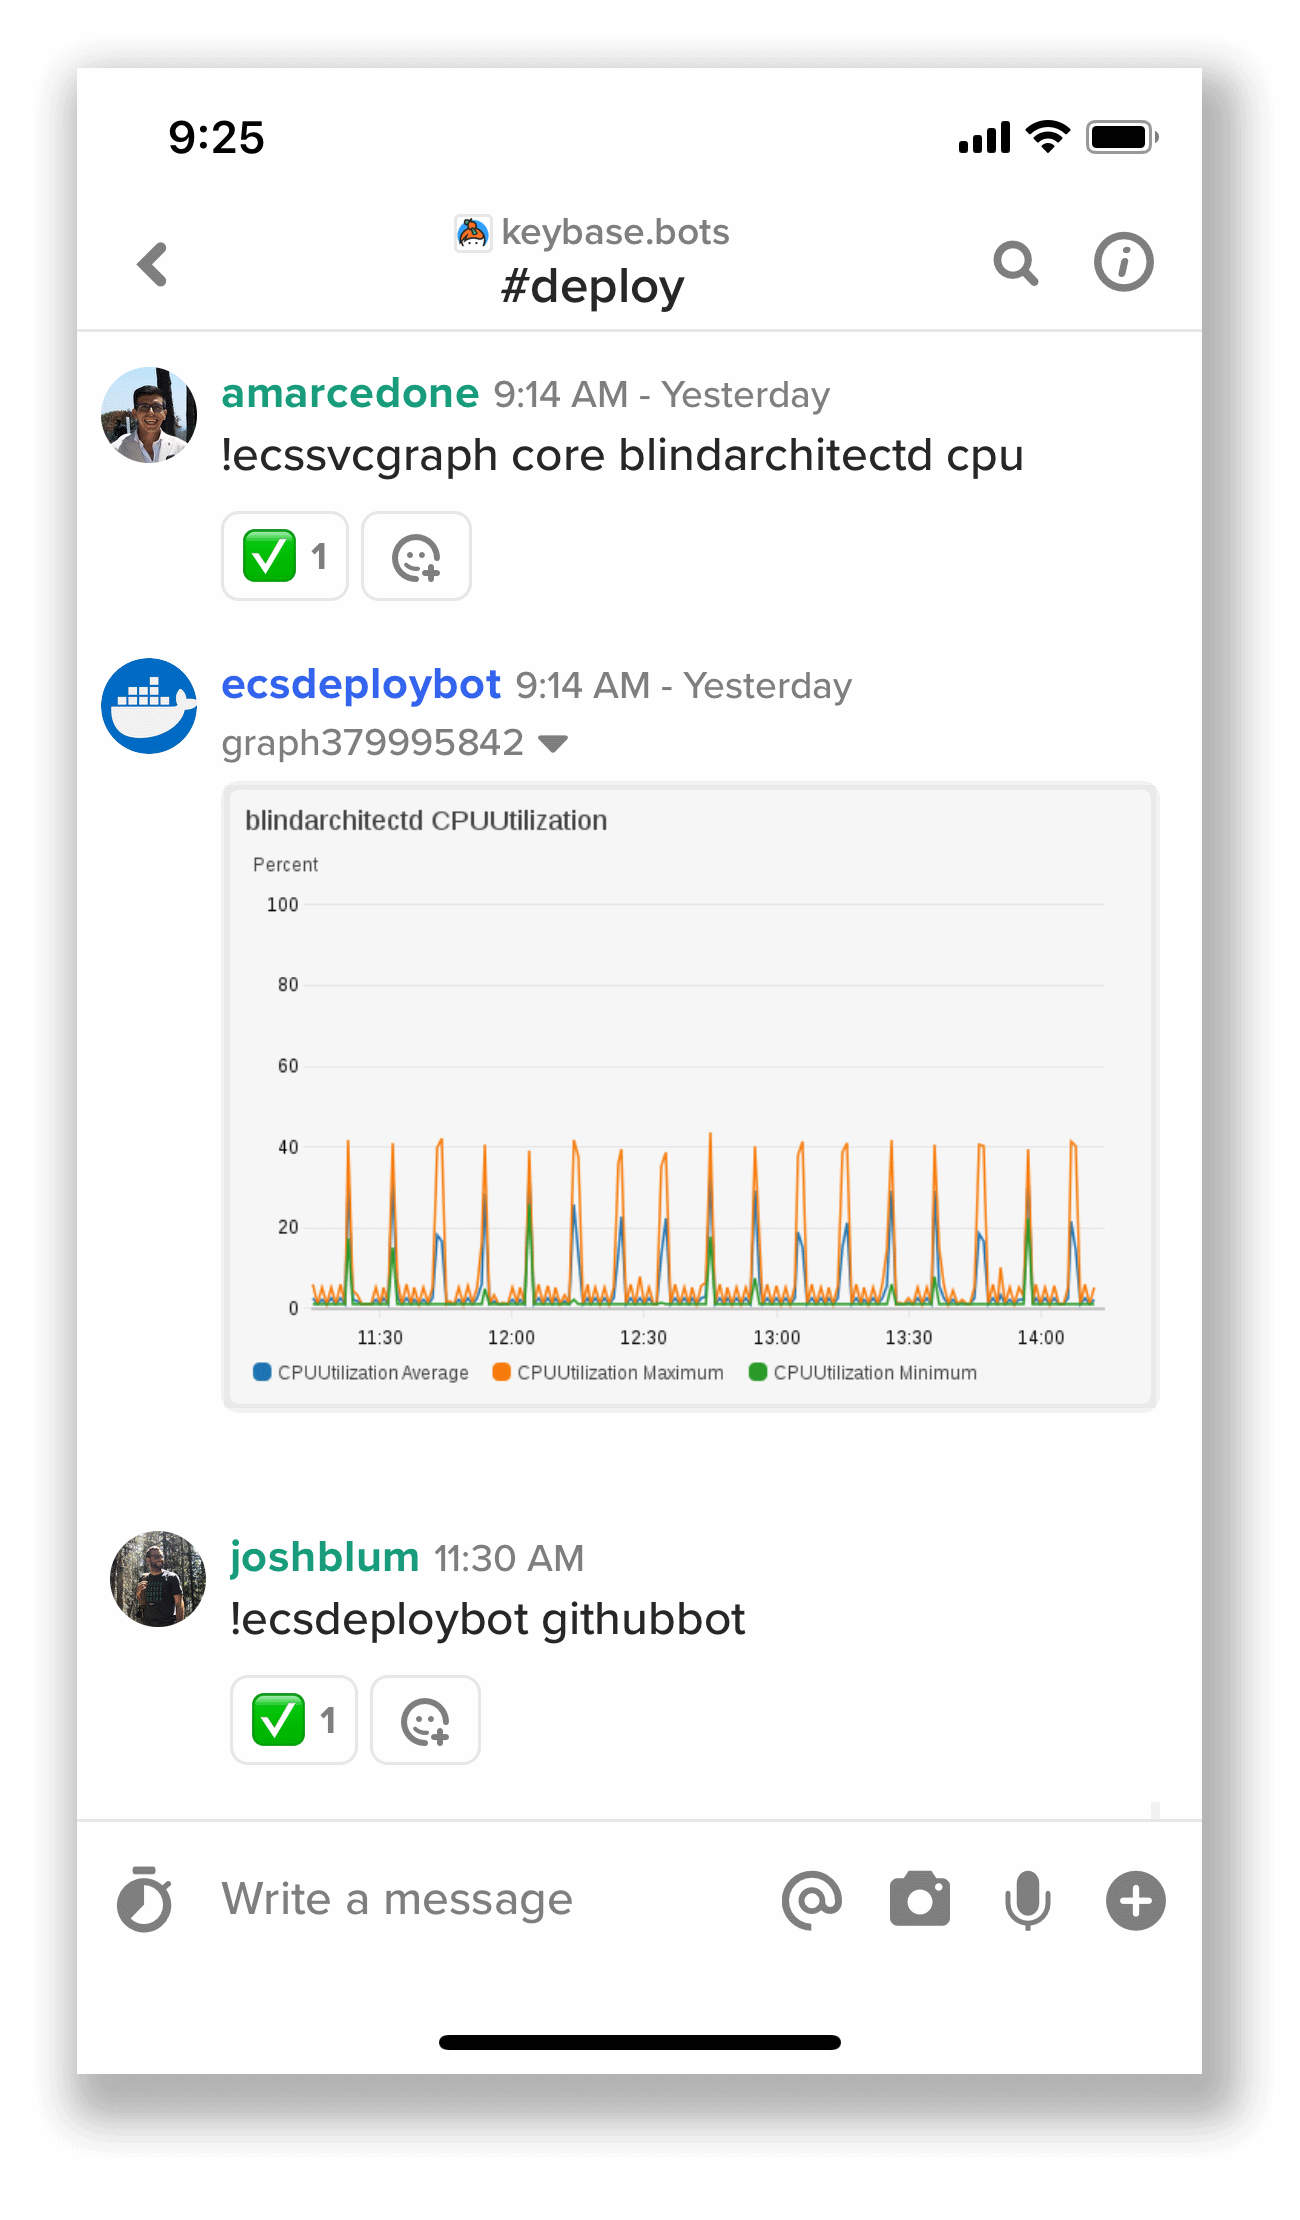 Users deploying servers with @ecsdeploybot in Keybase chat